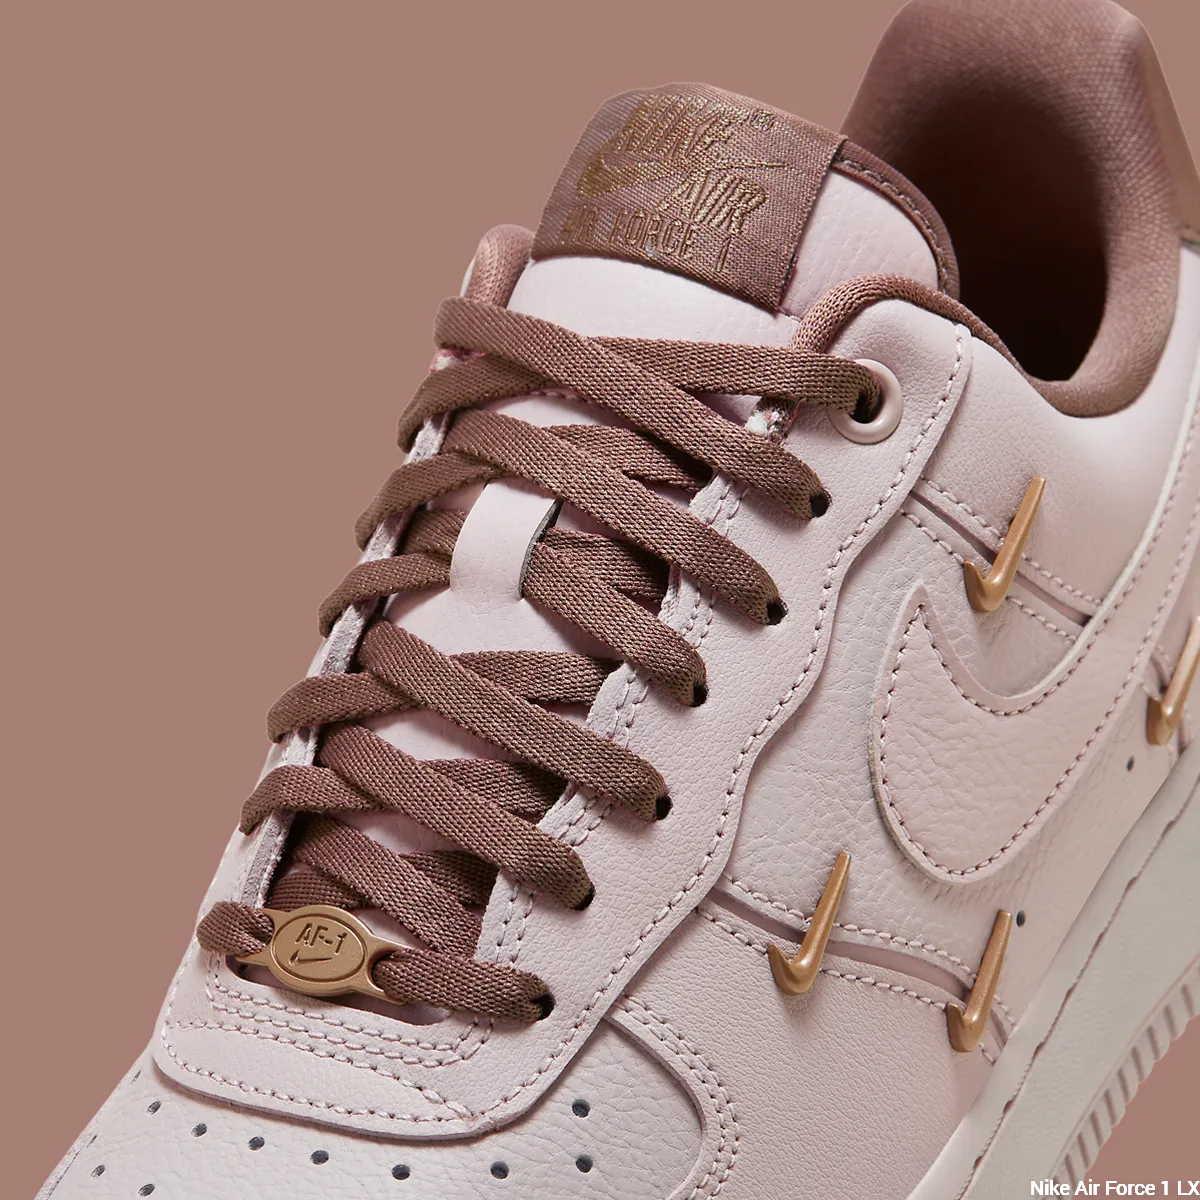 Nike Air Force 1 LX Pink version - shoe laces